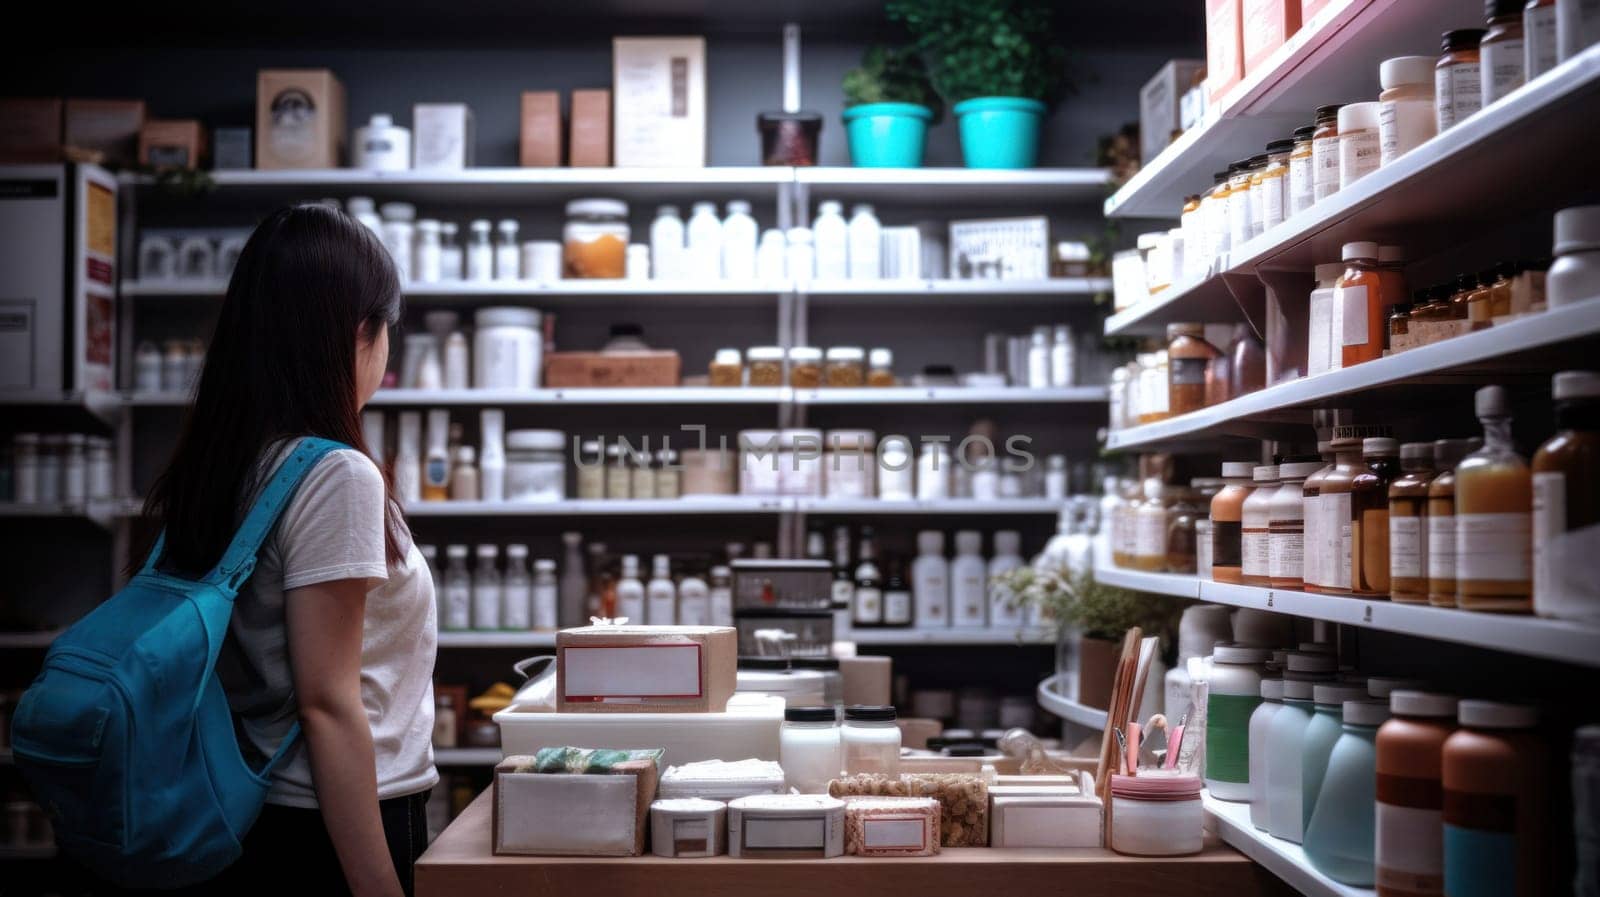 A woman with a backpack standing in front of shelves filled with products, AI by starush